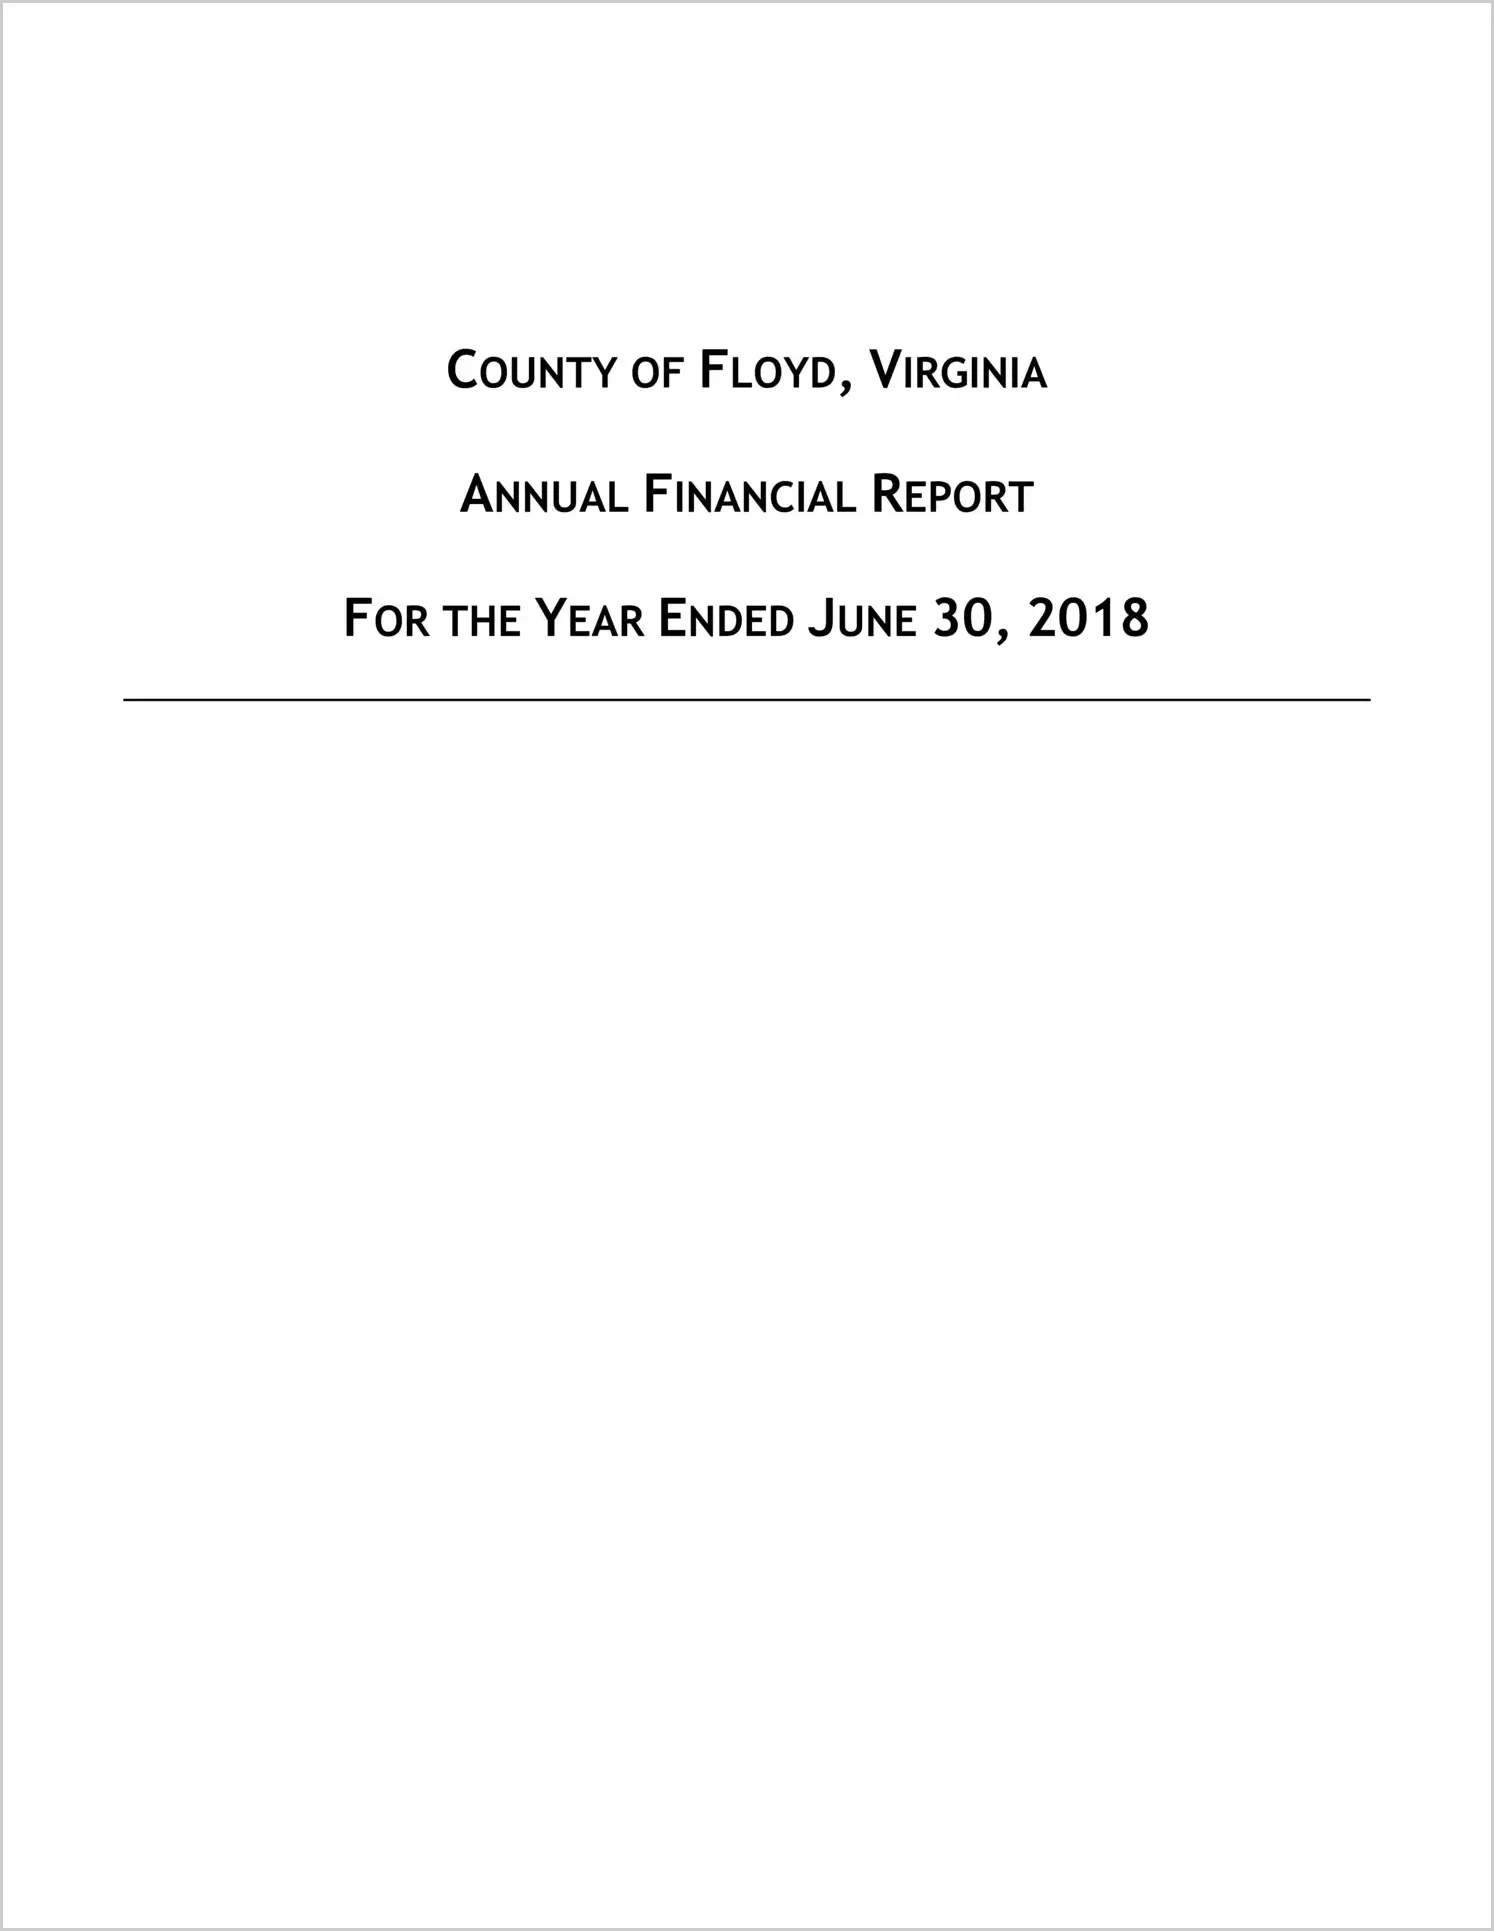 2018 Annual Financial Report for County of Floyd